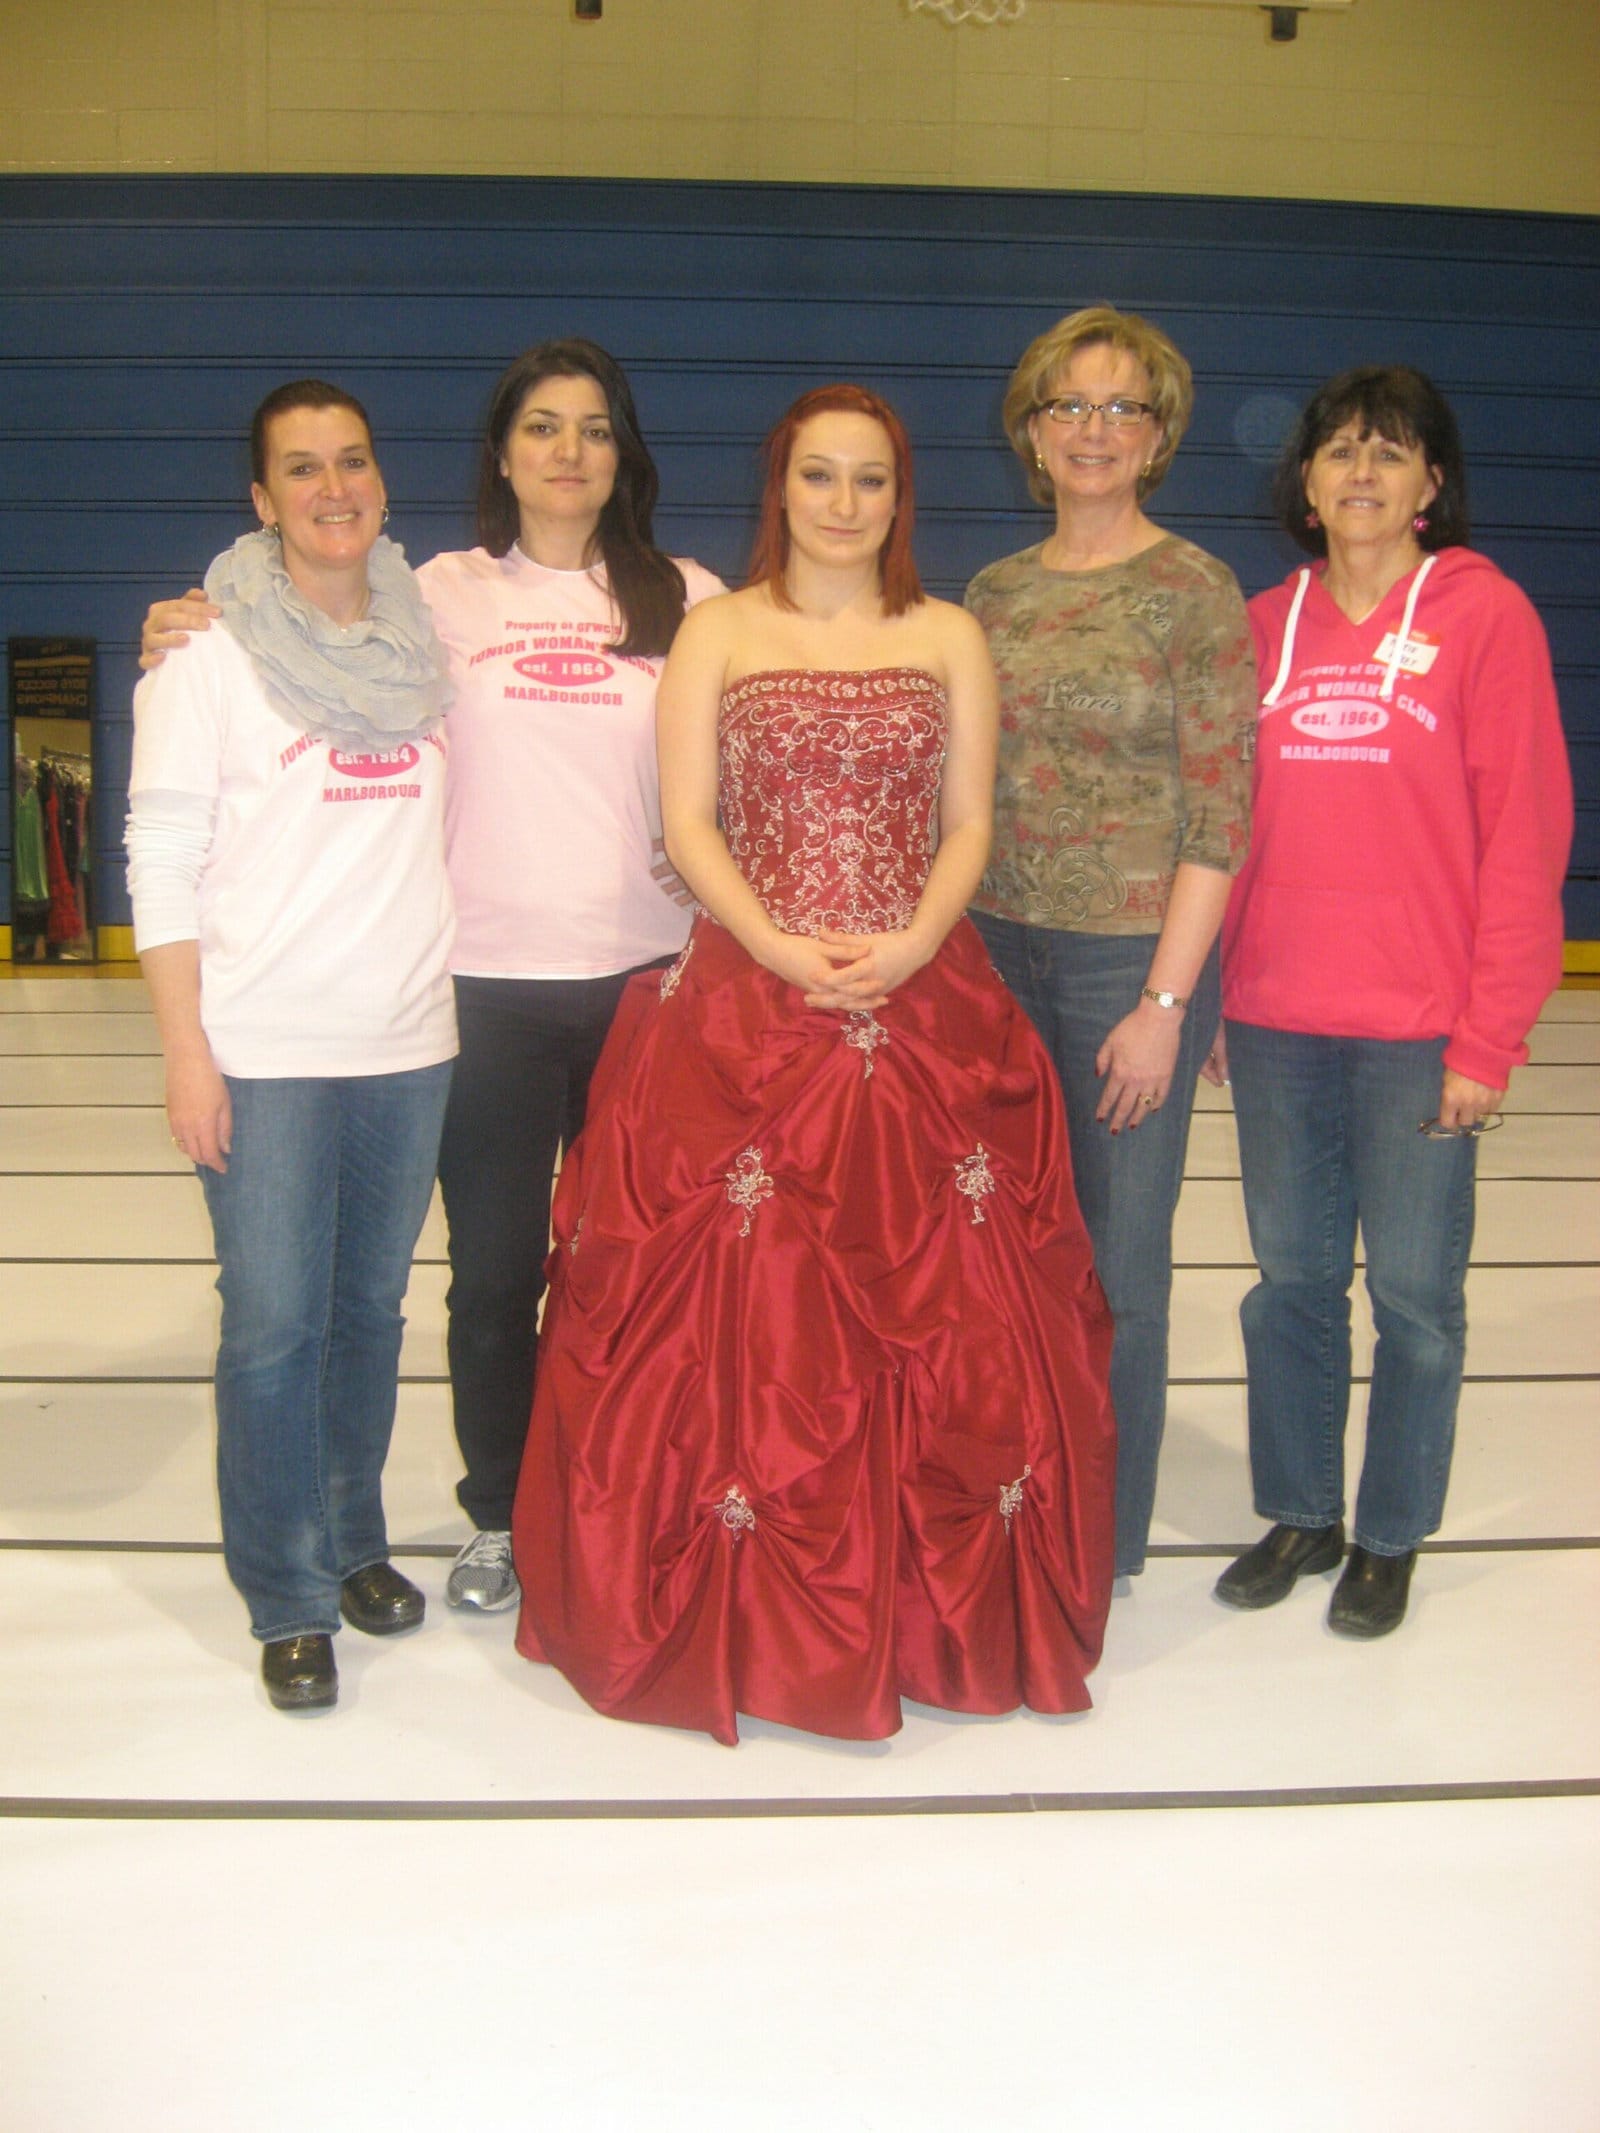 Wenzel: Princess Boutique comes to Marlborough High School for prom season